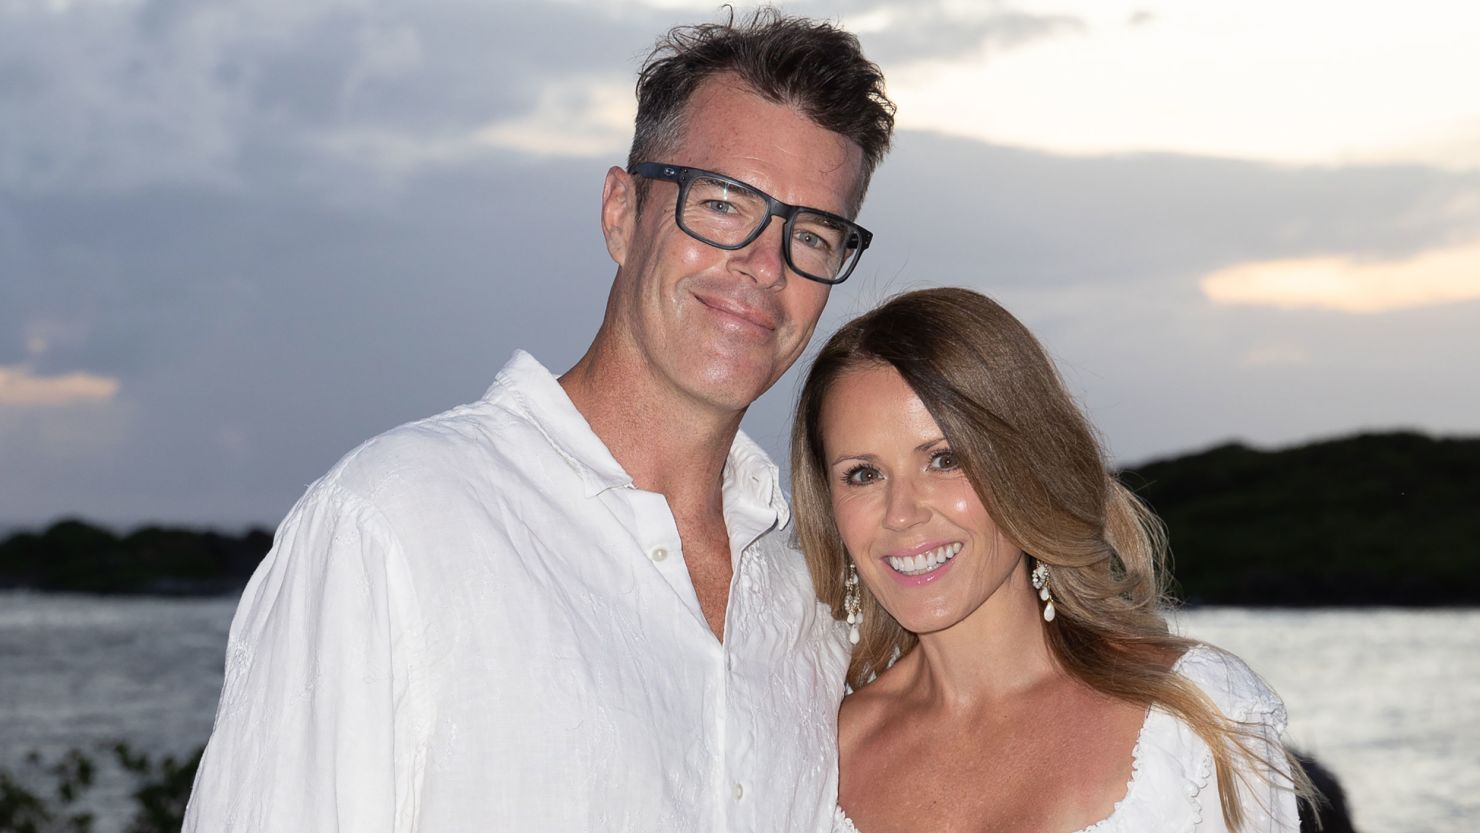 Ryan and Trista Sutter have been married 20 years since she was the